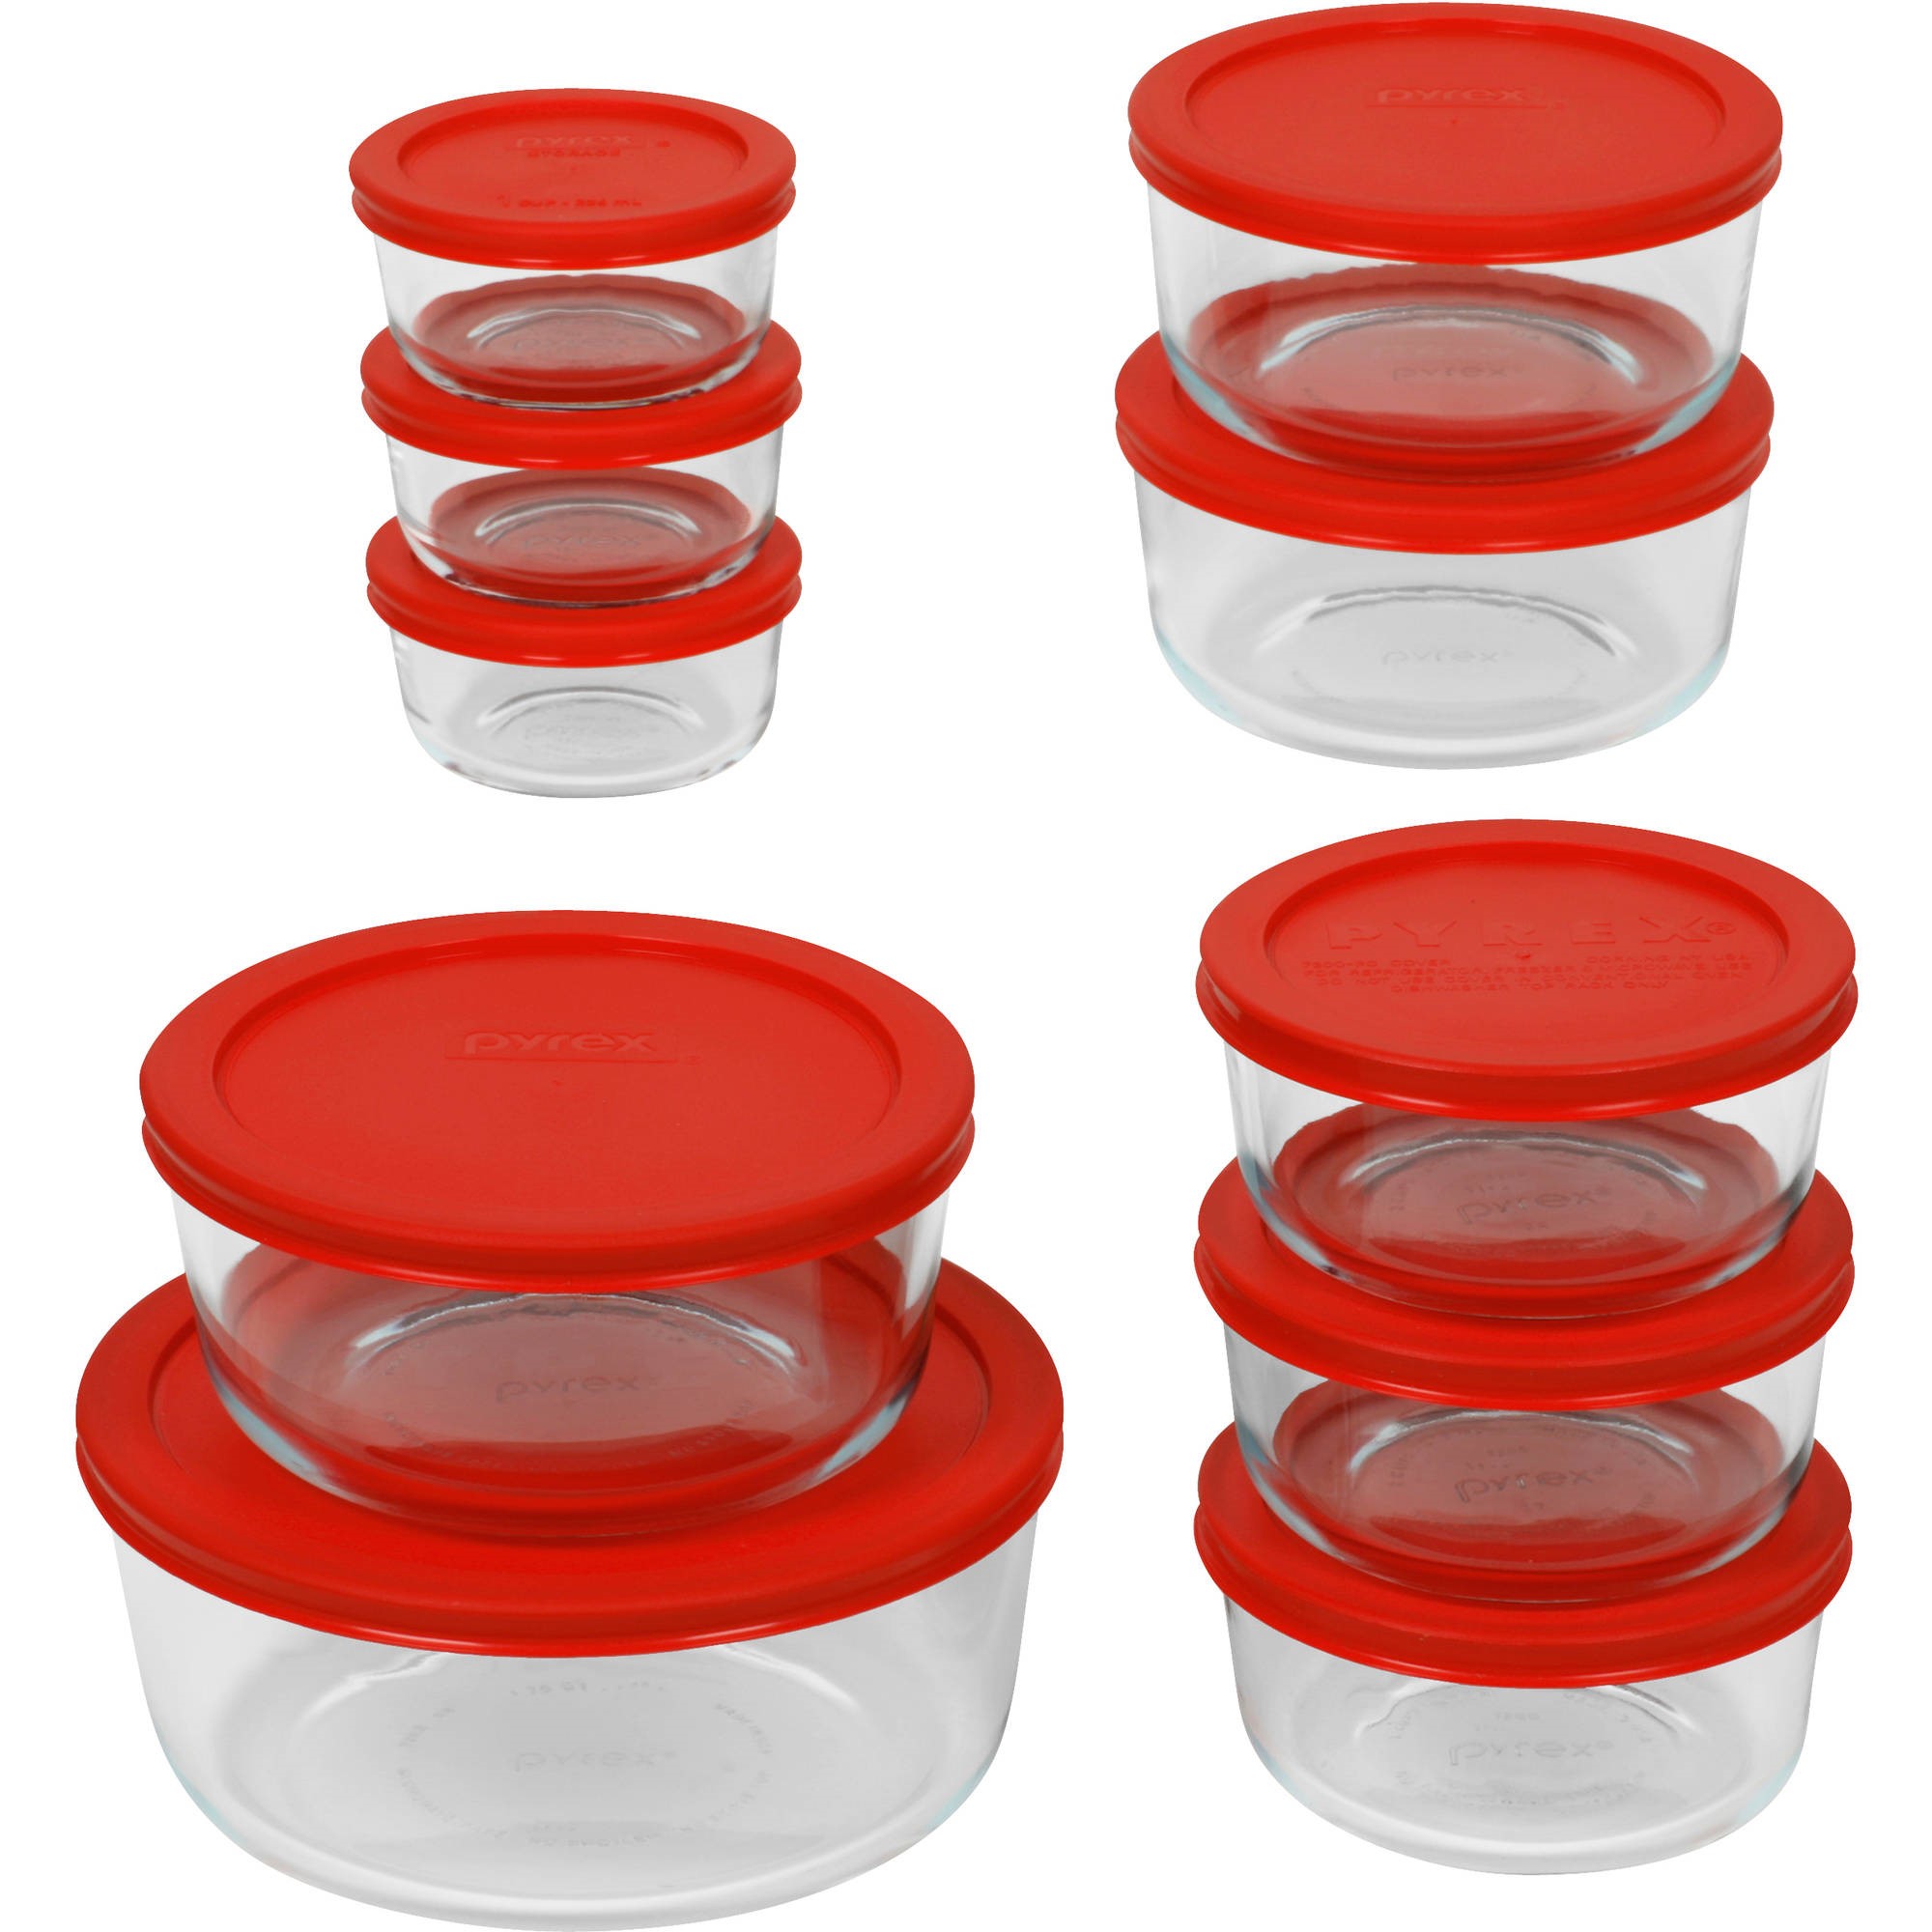 Pyrex Food Storage Glass Bakeware with Red Lids, 20 Piece - image 1 of 5